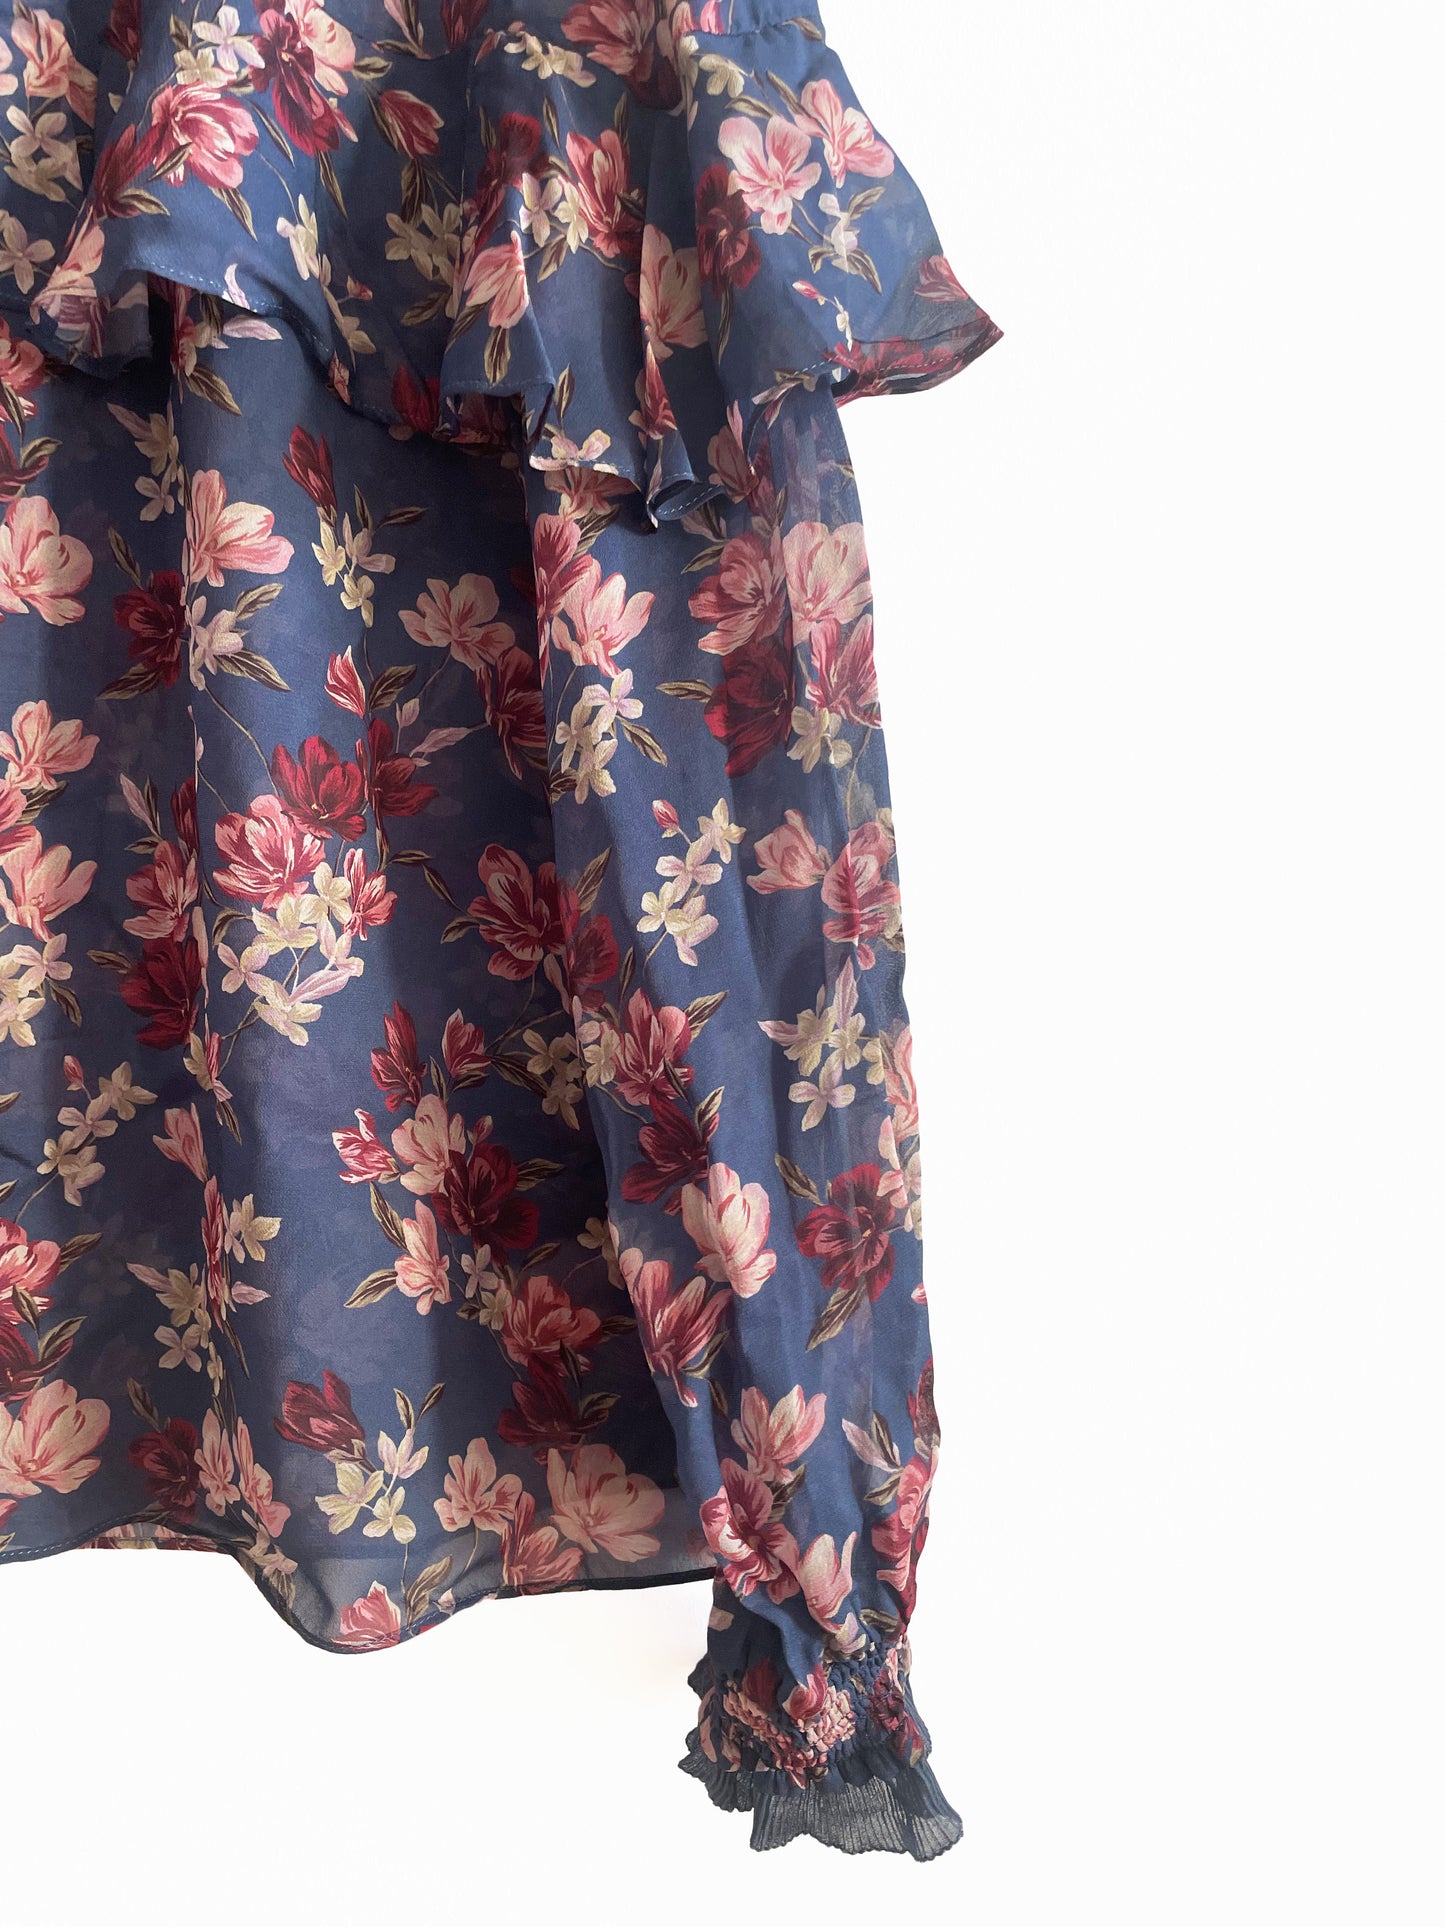 Romantic Flower Print Top with Ruffles, Sizes S, L